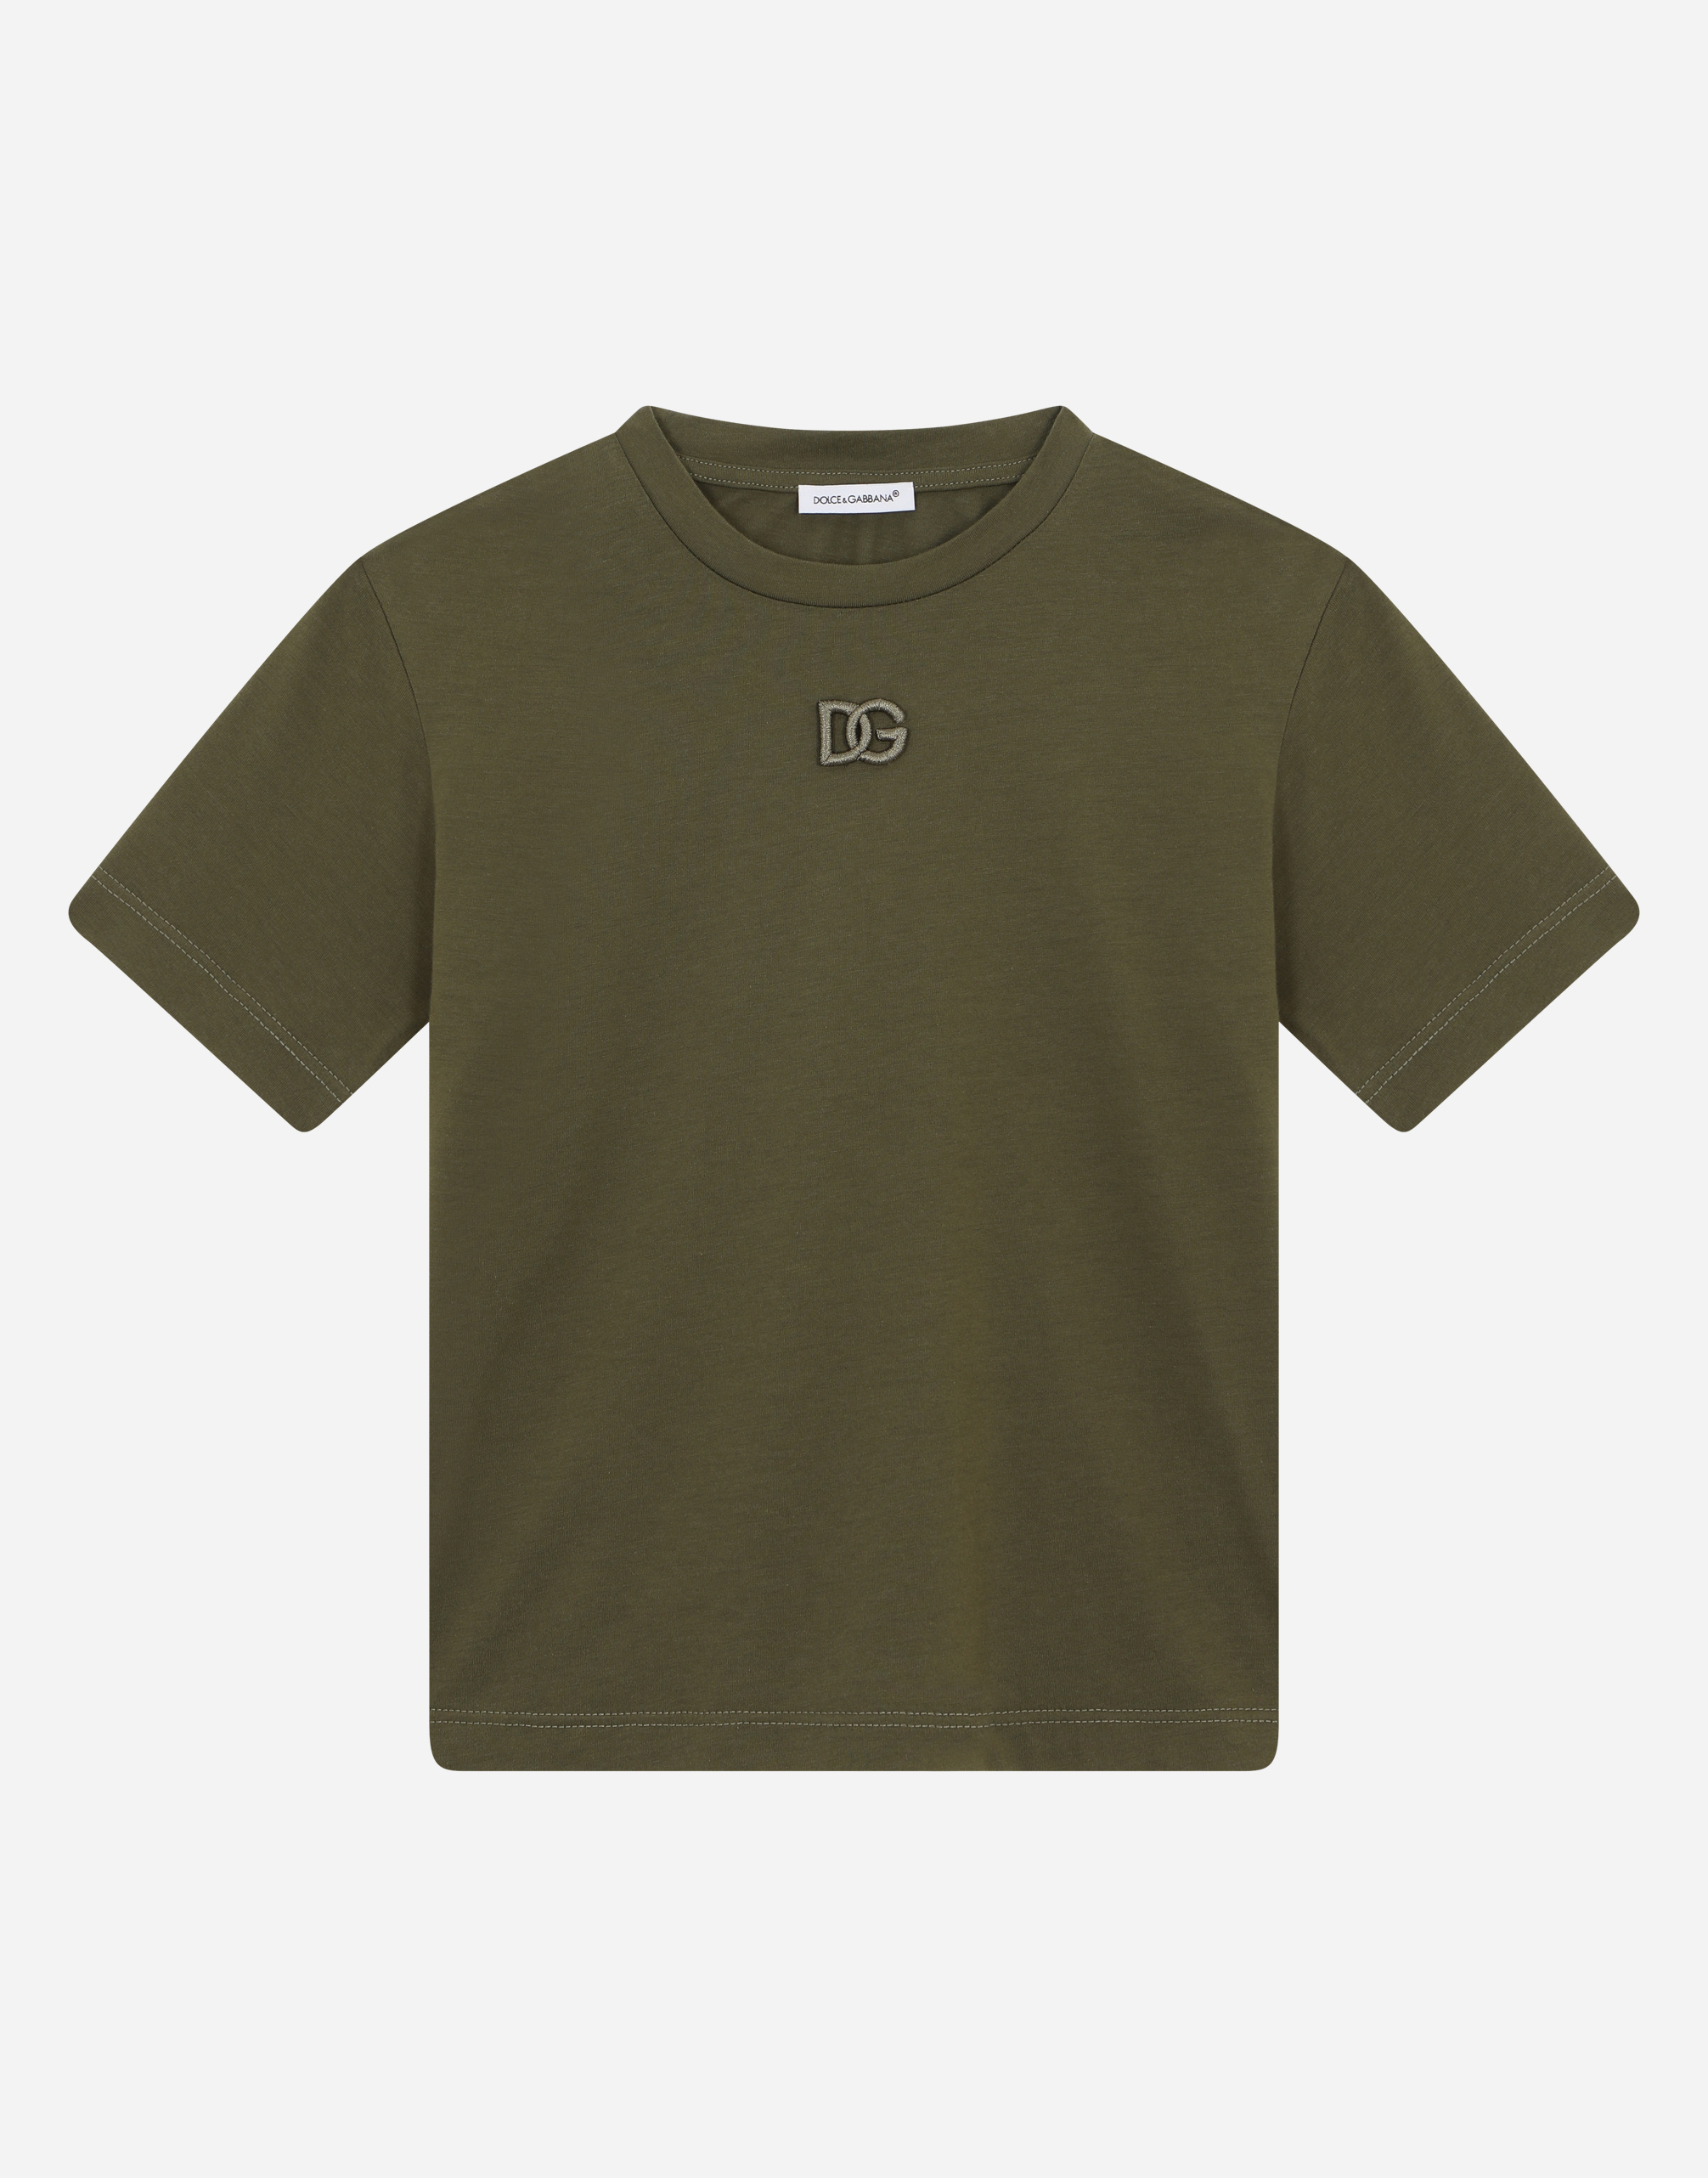 Jersey T-shirt with DG logo embroidery in Green